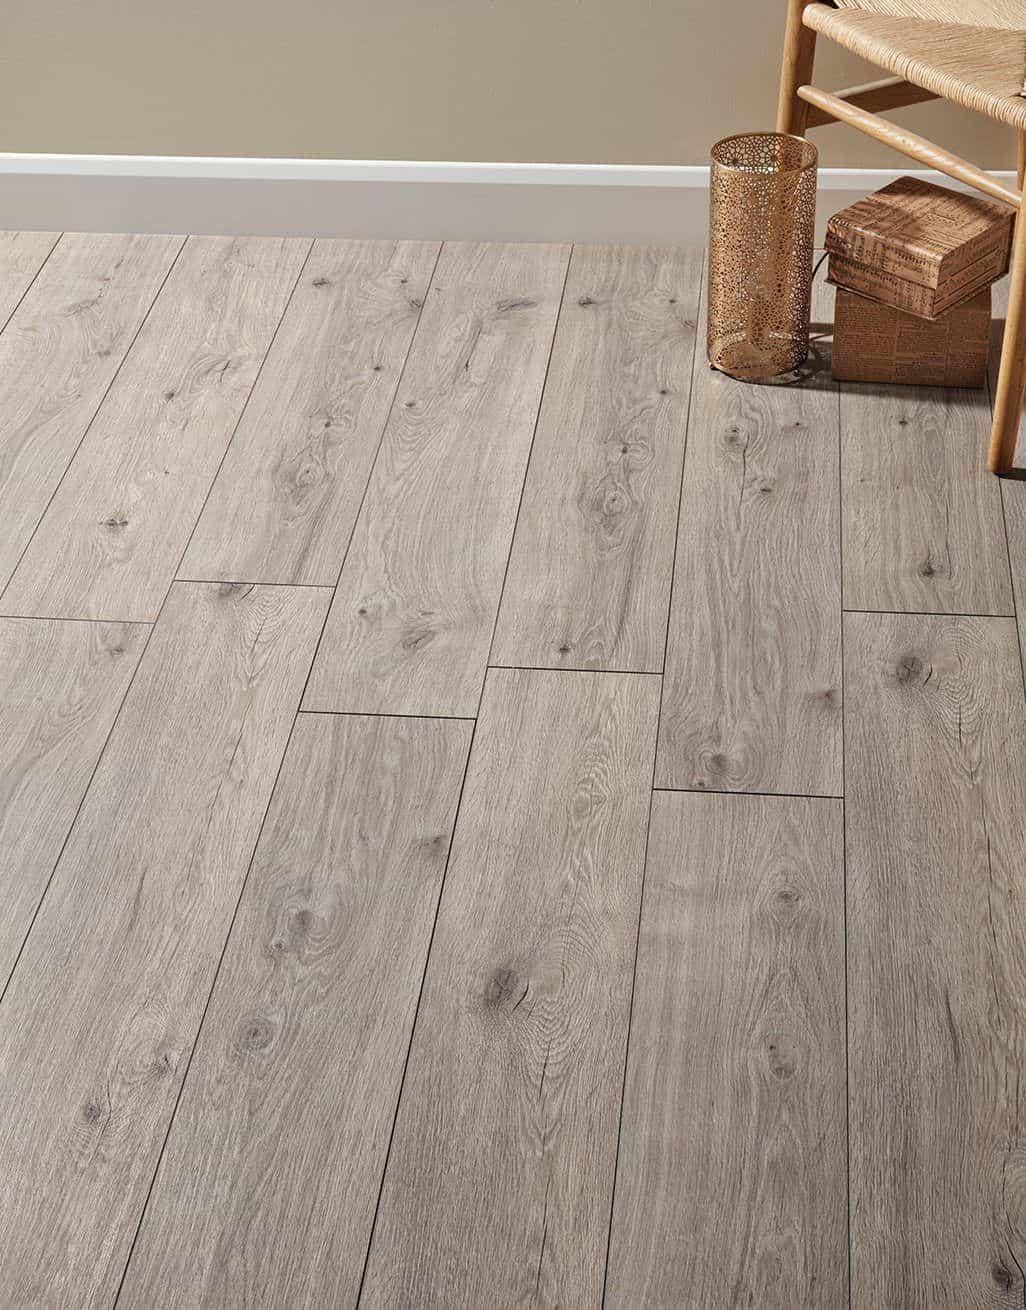 Laminate Wood Flooring For Your Home